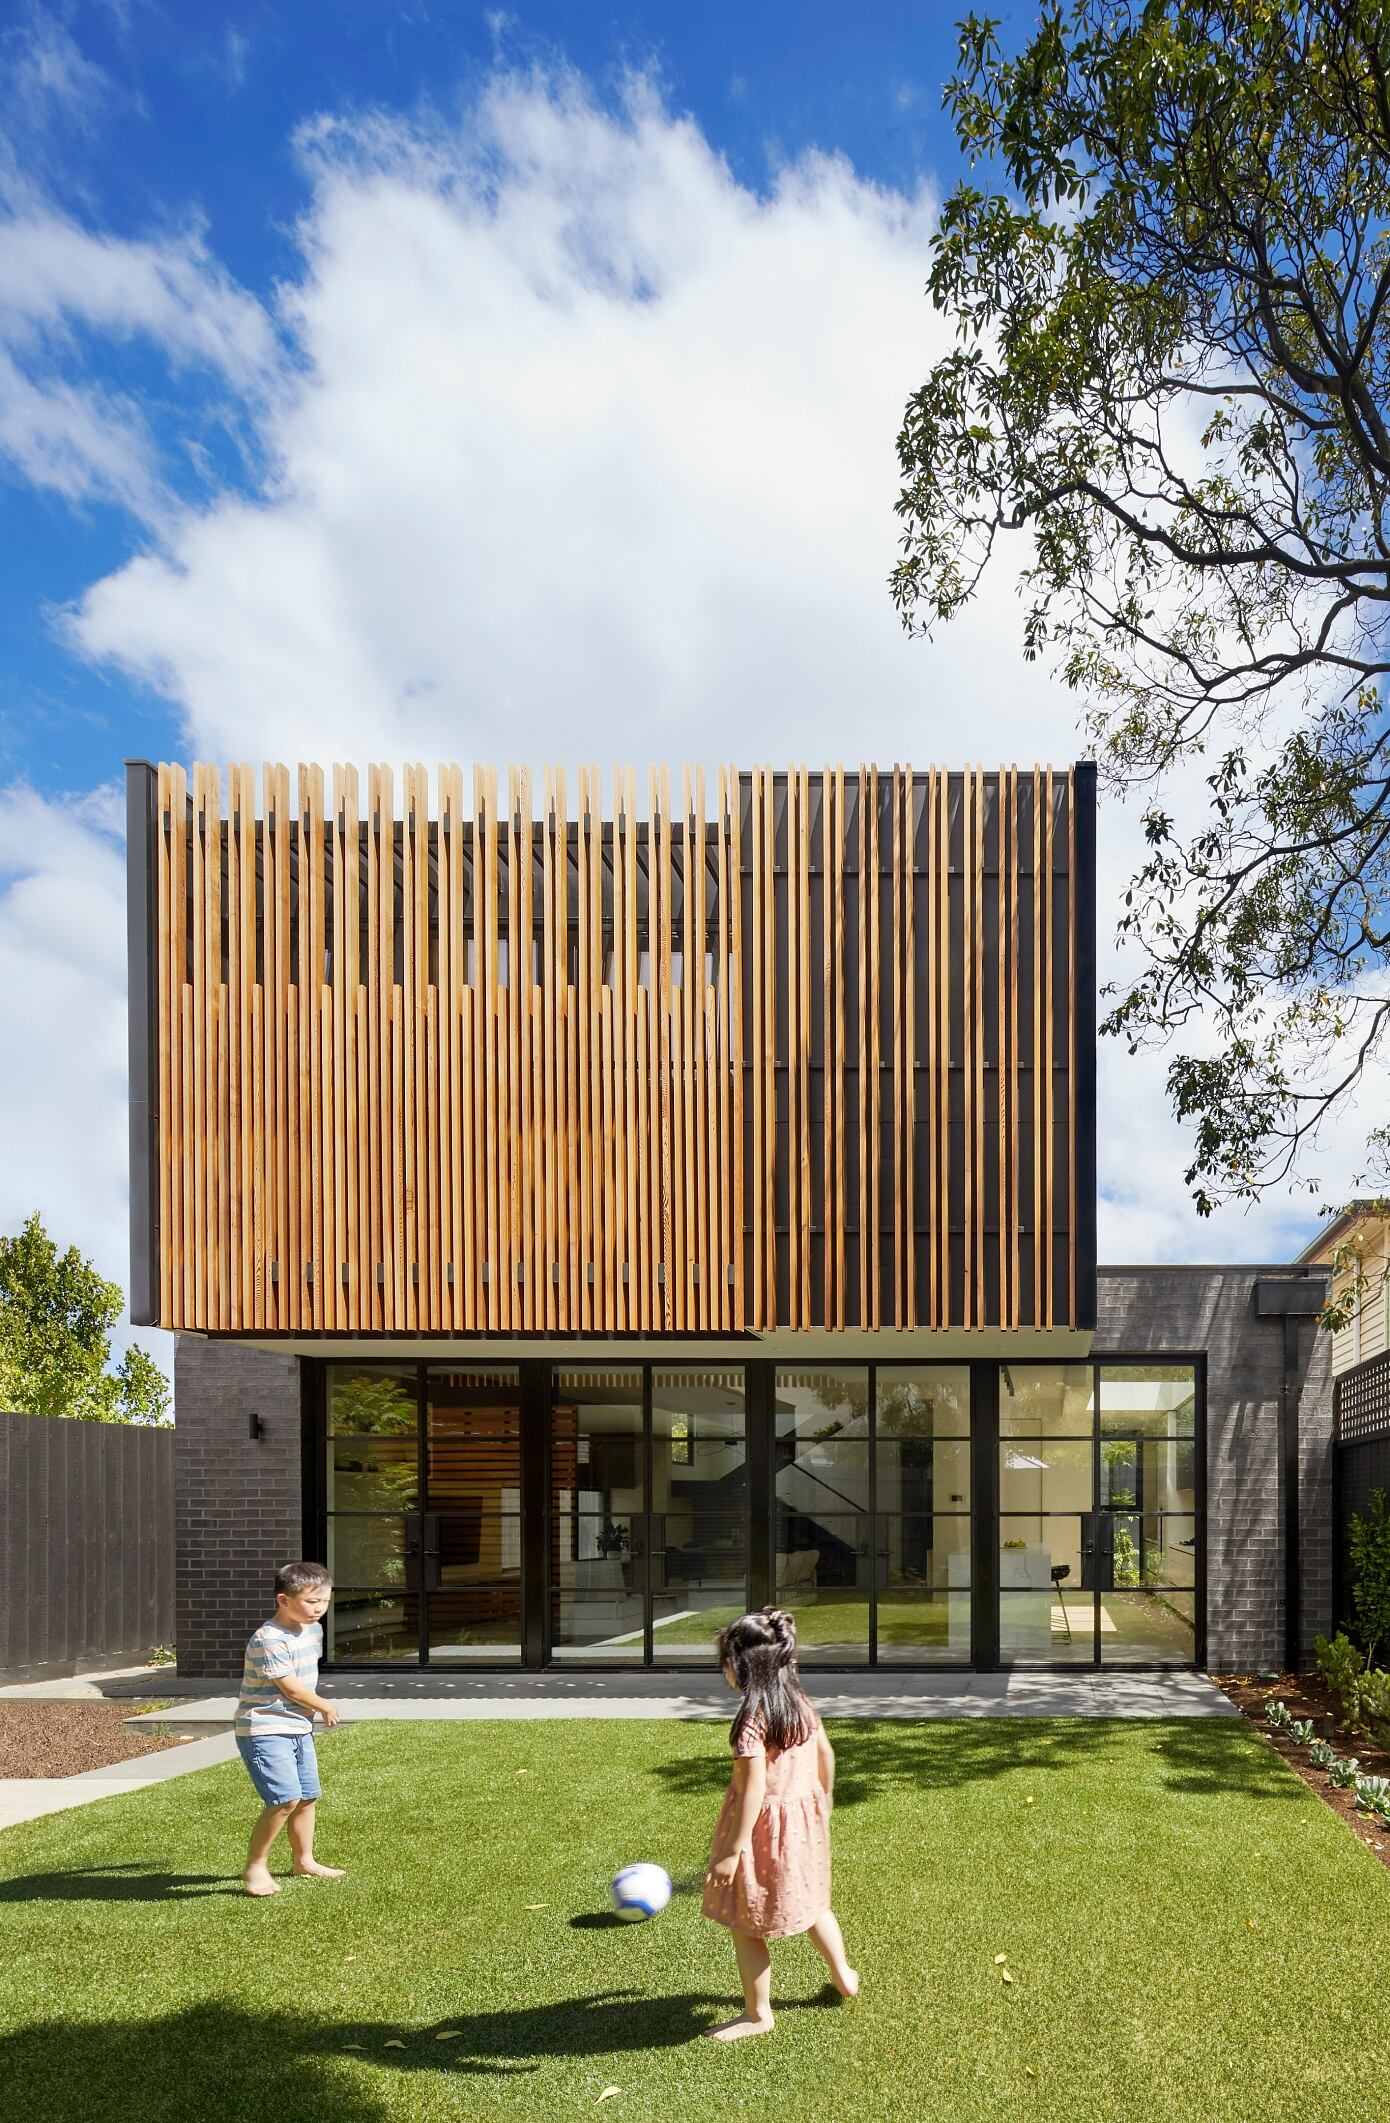 Roseberry Street House by Chan Architecture